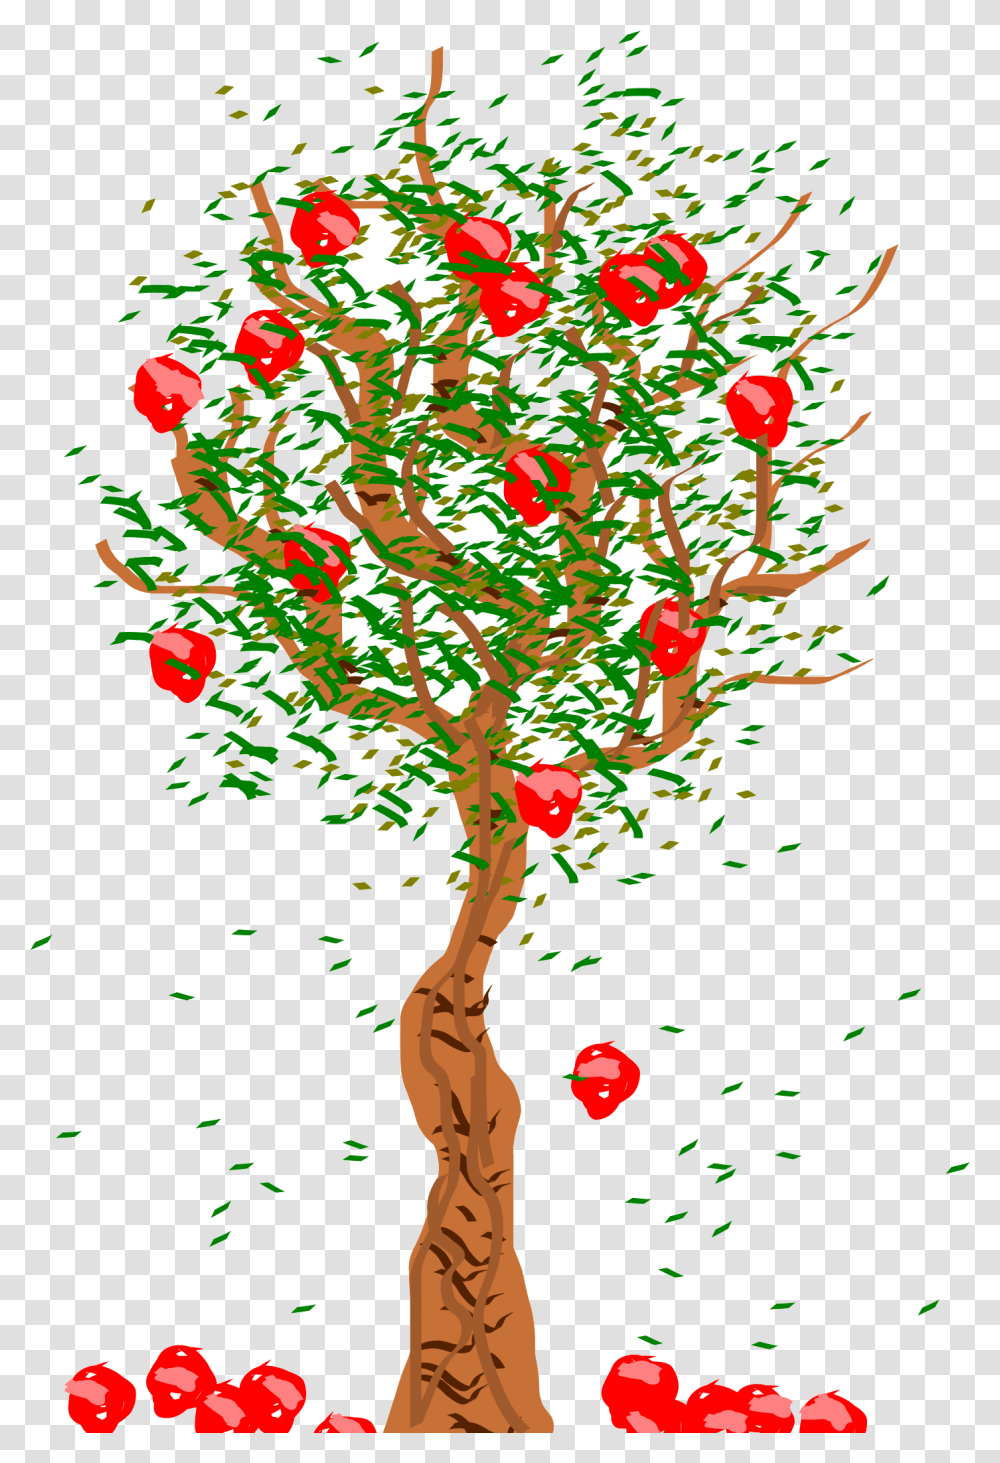 Apple Tree Trees Vector Huge Freebie For Powerpoint Fruit Falling From Tree, Paper, Confetti, Plant Transparent Png